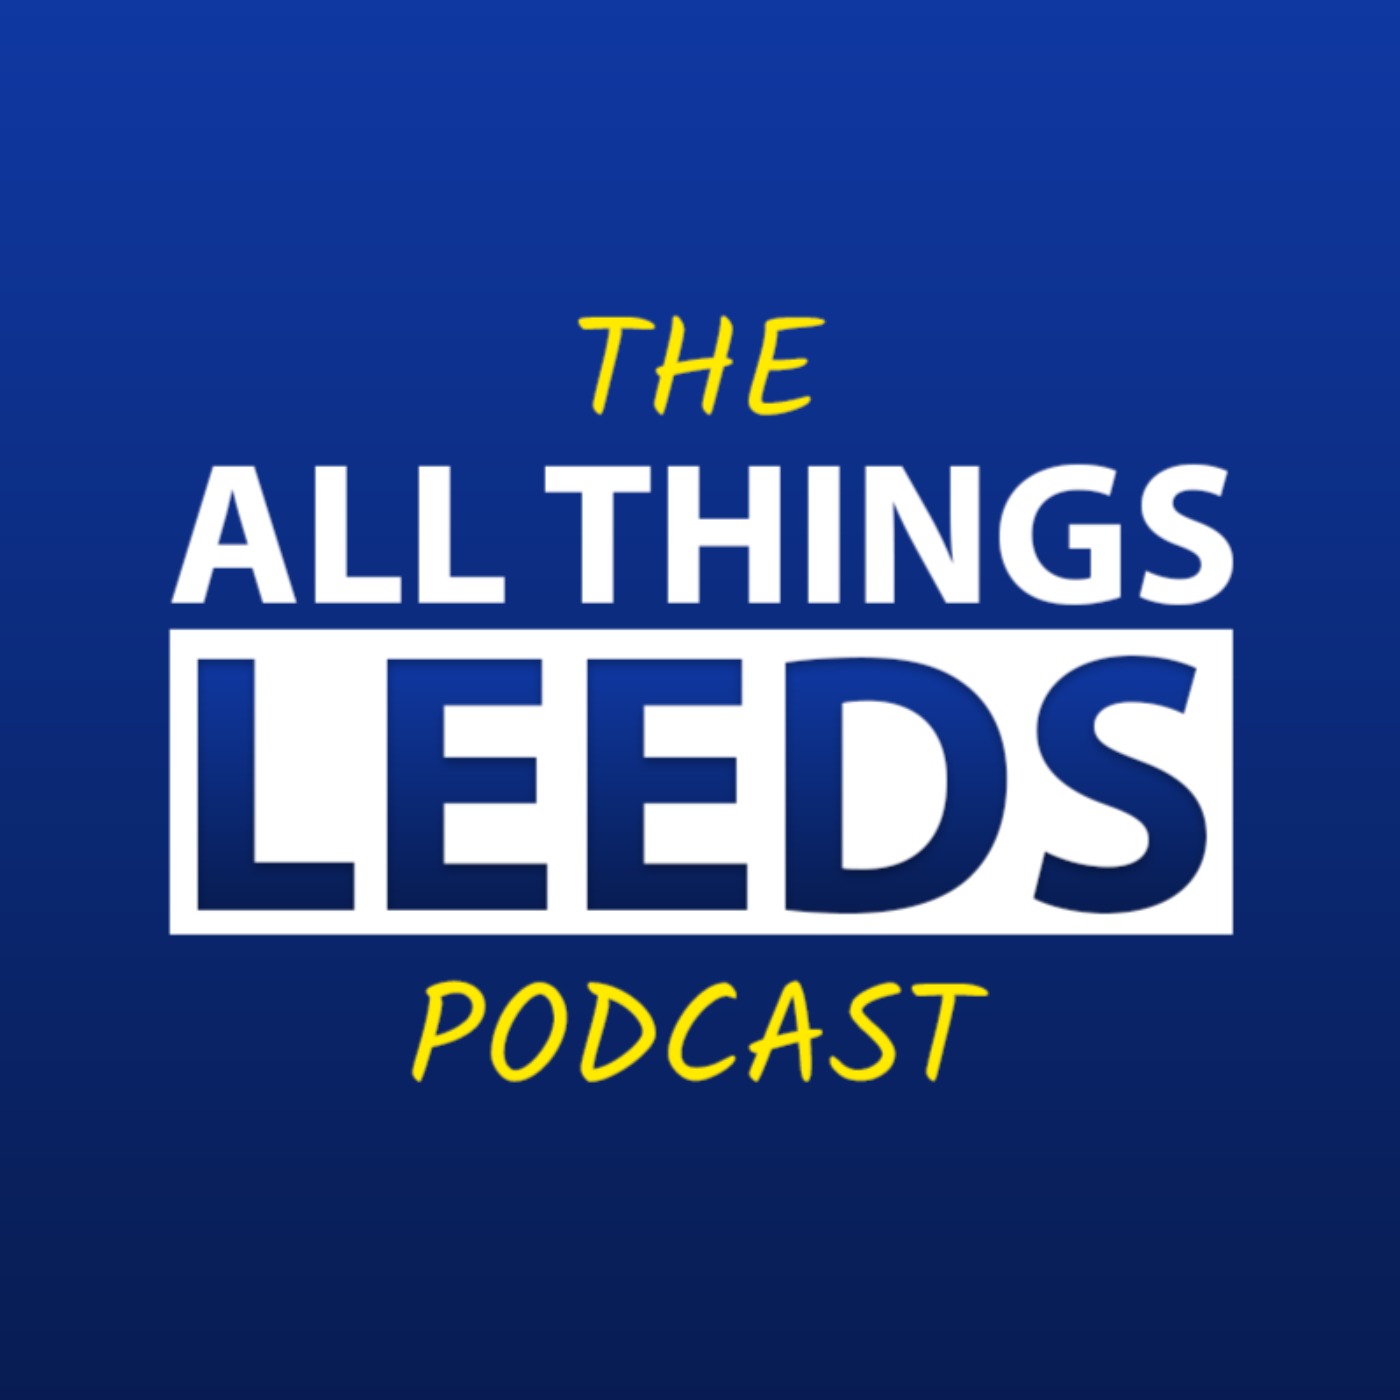 Episode 78 - HOW WILL LEEDS COPE WITHOUT PHILLIPS?